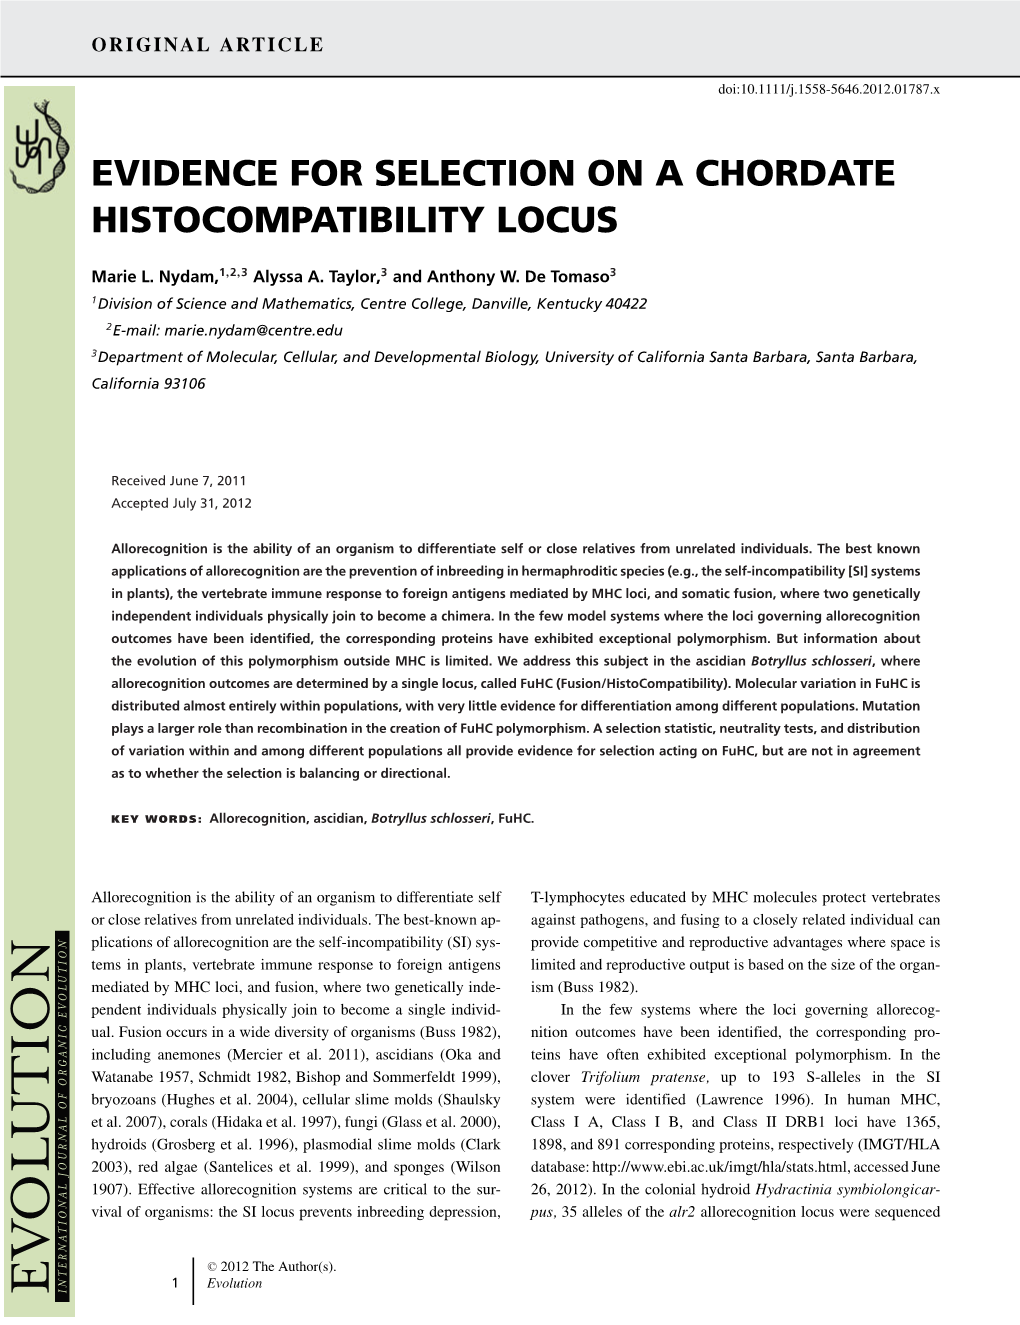 Evidence for Selection on a Chordate Histocompatibility Locus